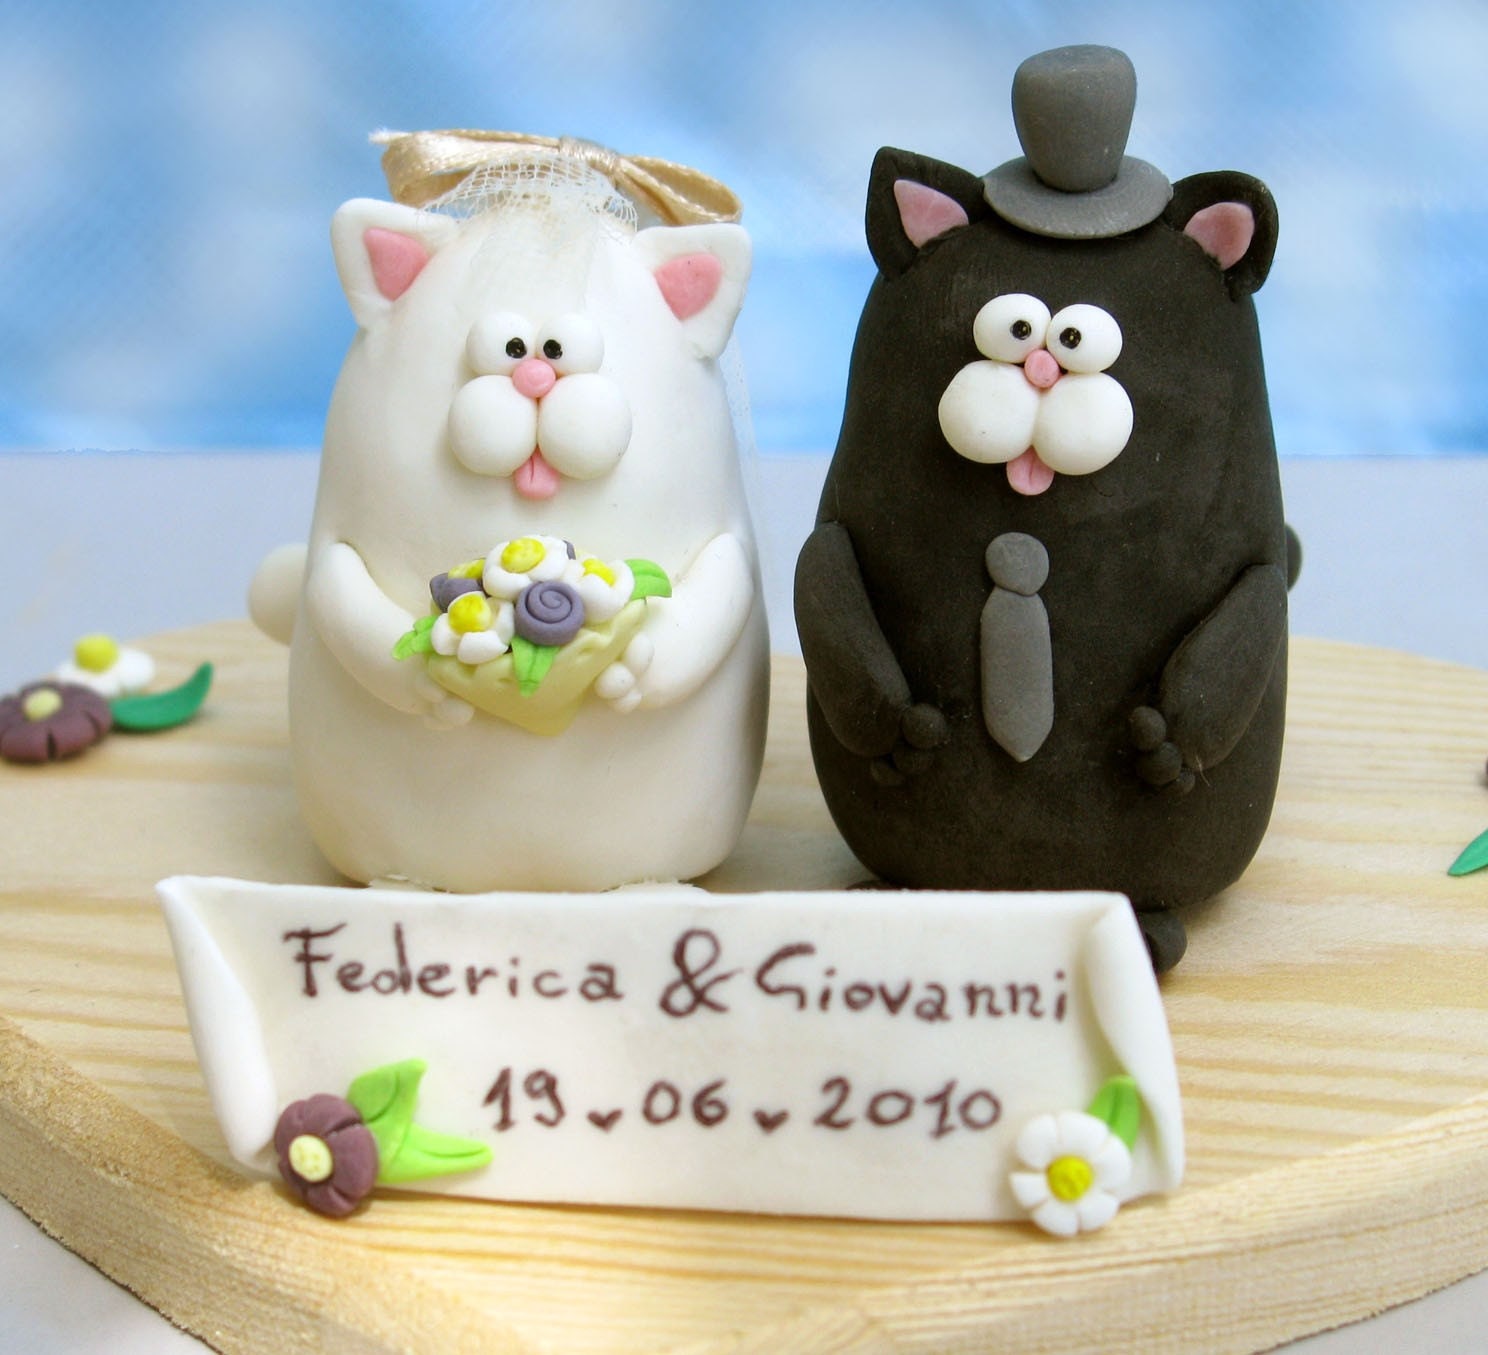 Cute funny cats wedding cake topper with decorated wooden base and banner